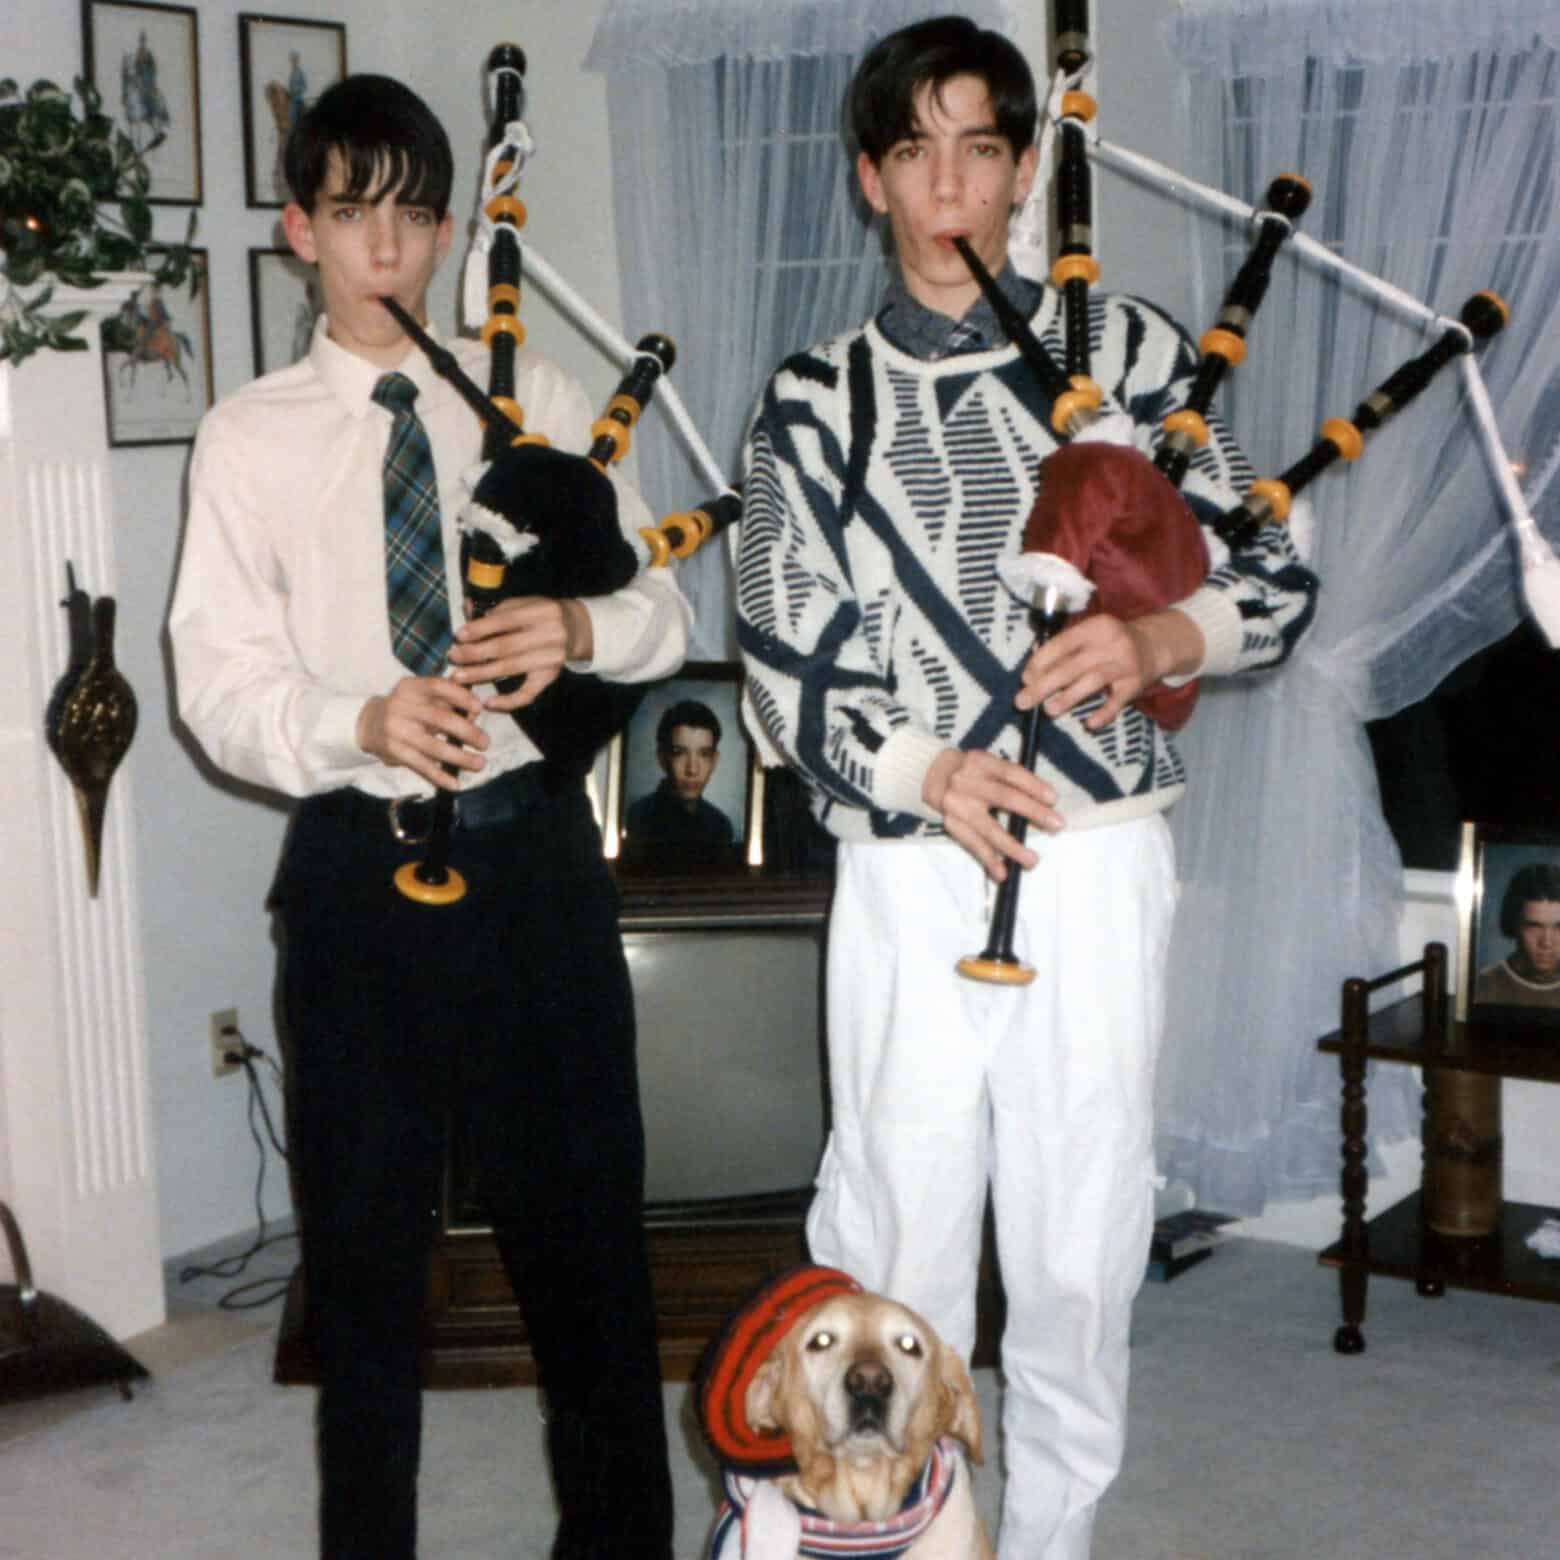 drew and jonathan scott playing bagpipes as teens